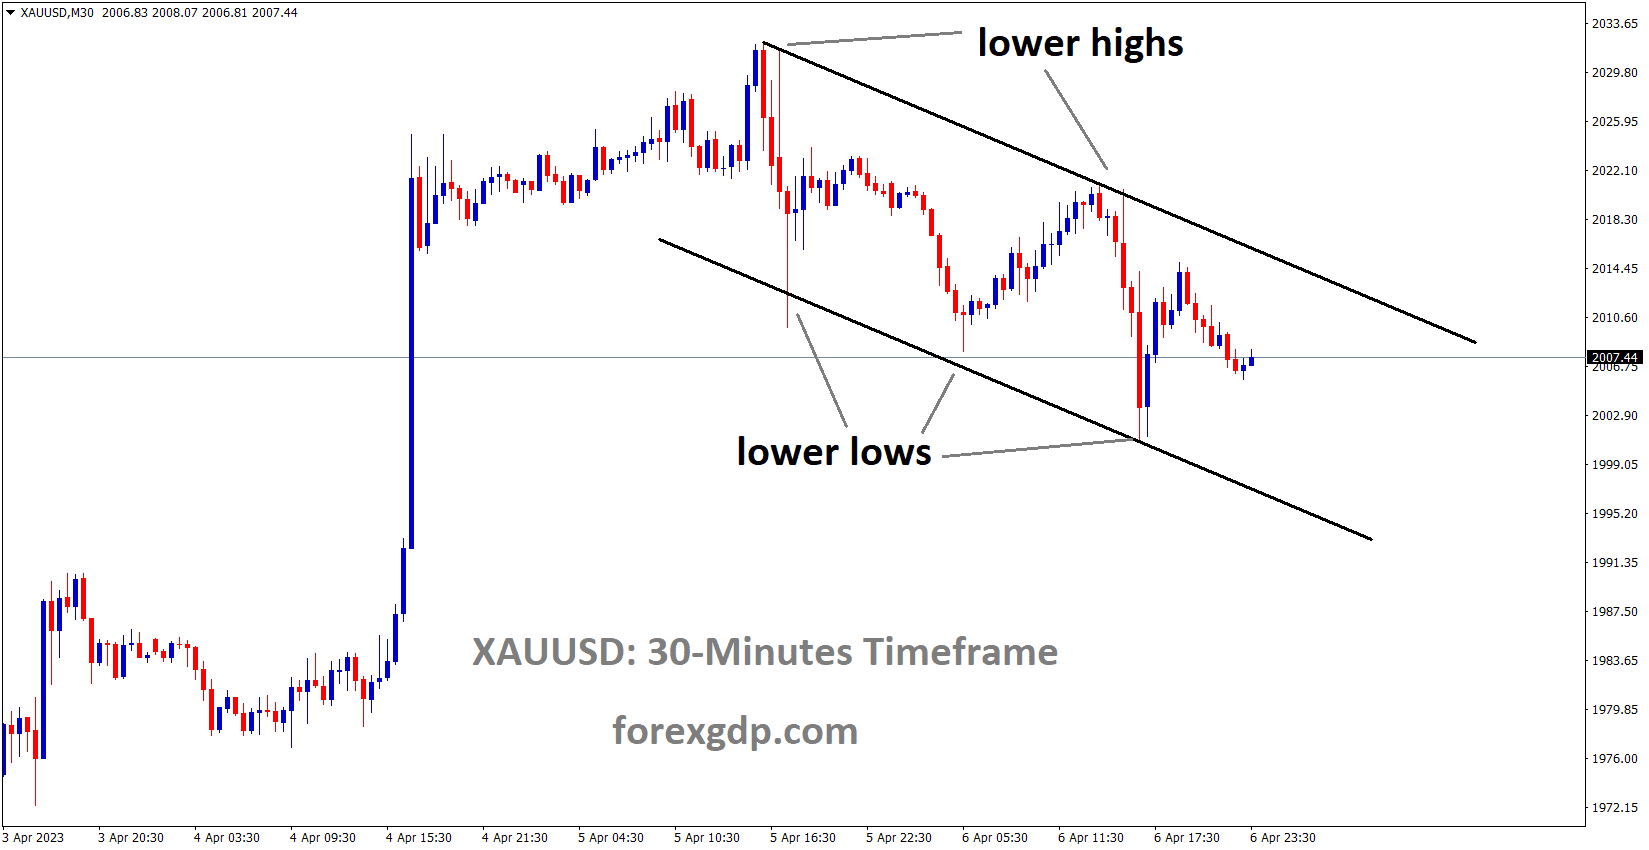 XAUUSD Gold price is moving in the descending channel and the market has rebounded from the lower low area of the channel